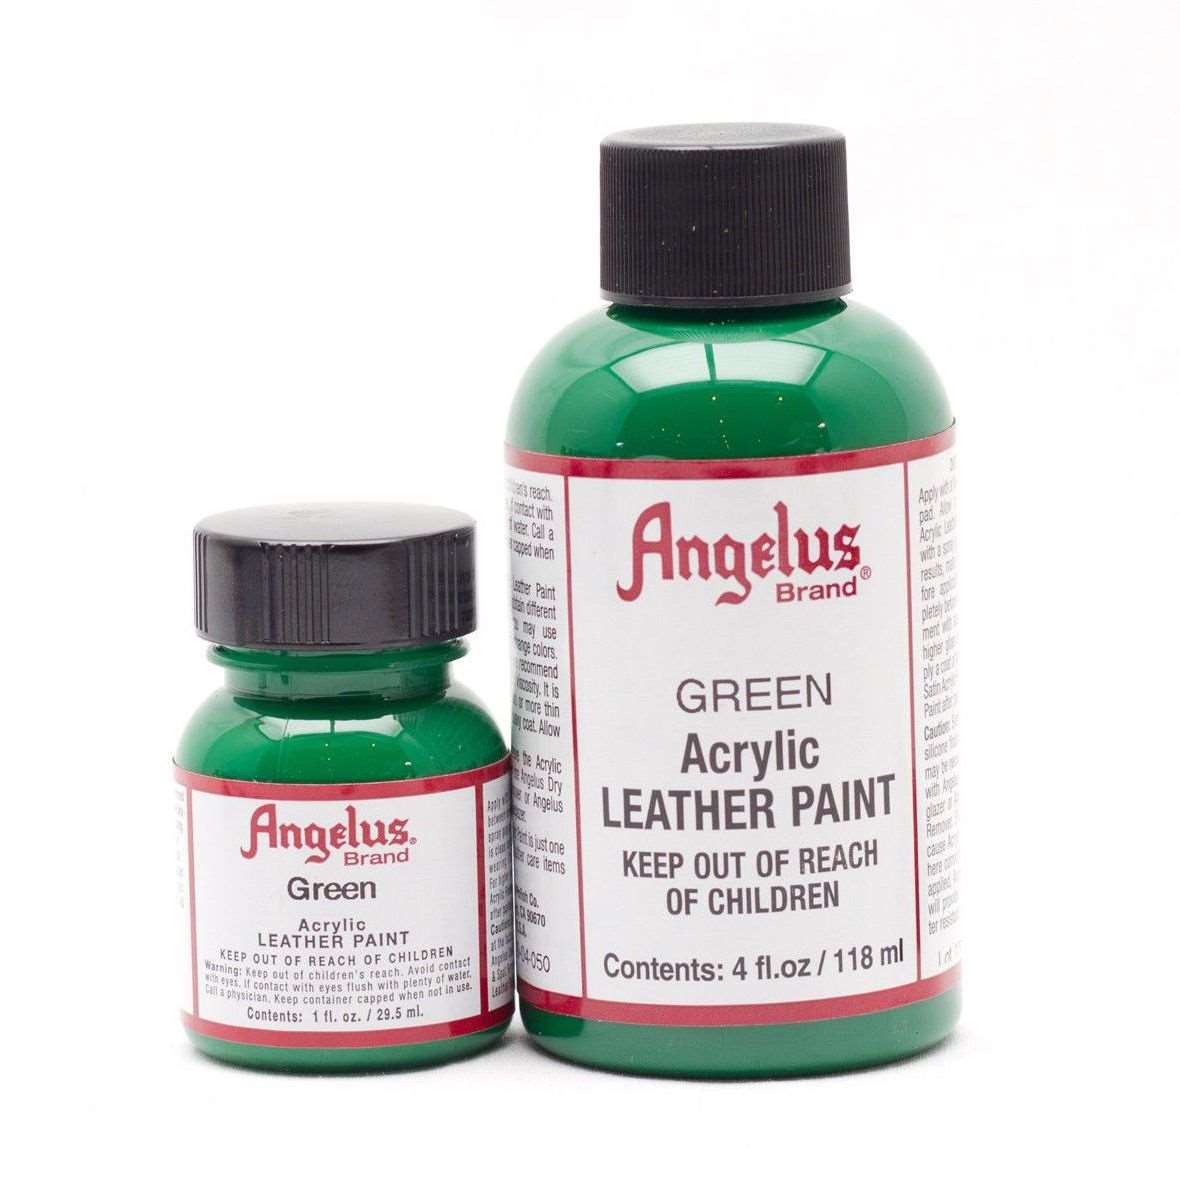 ANGELUS Acrylic Leather Paint Green | Mollies Make And Create NZ